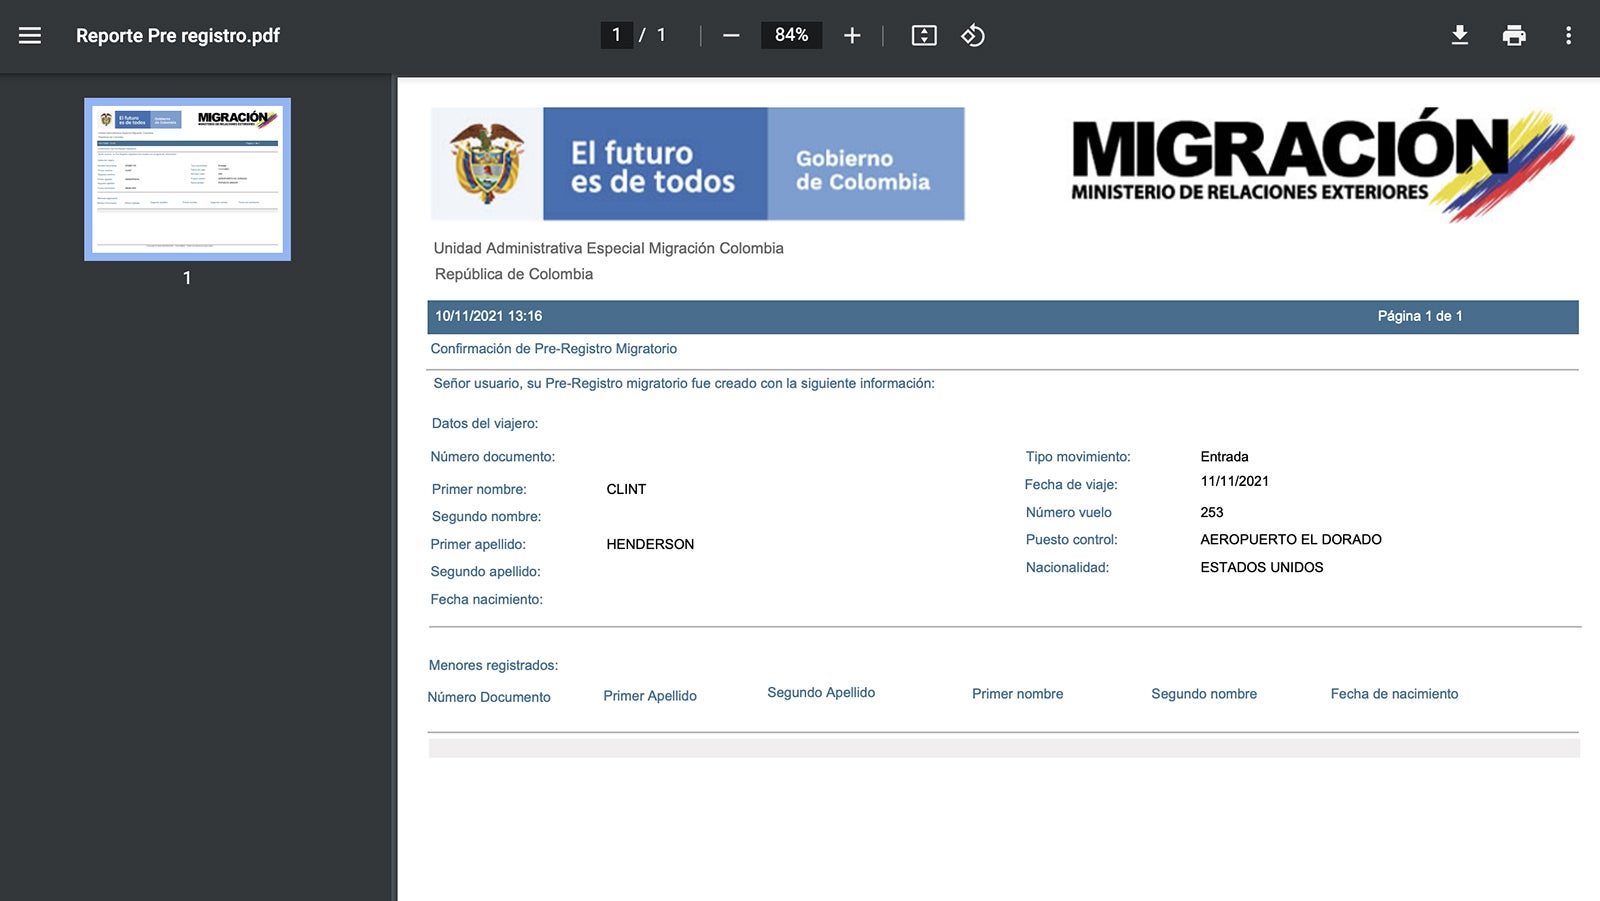 (Screenshots courtesy government of Colombia)